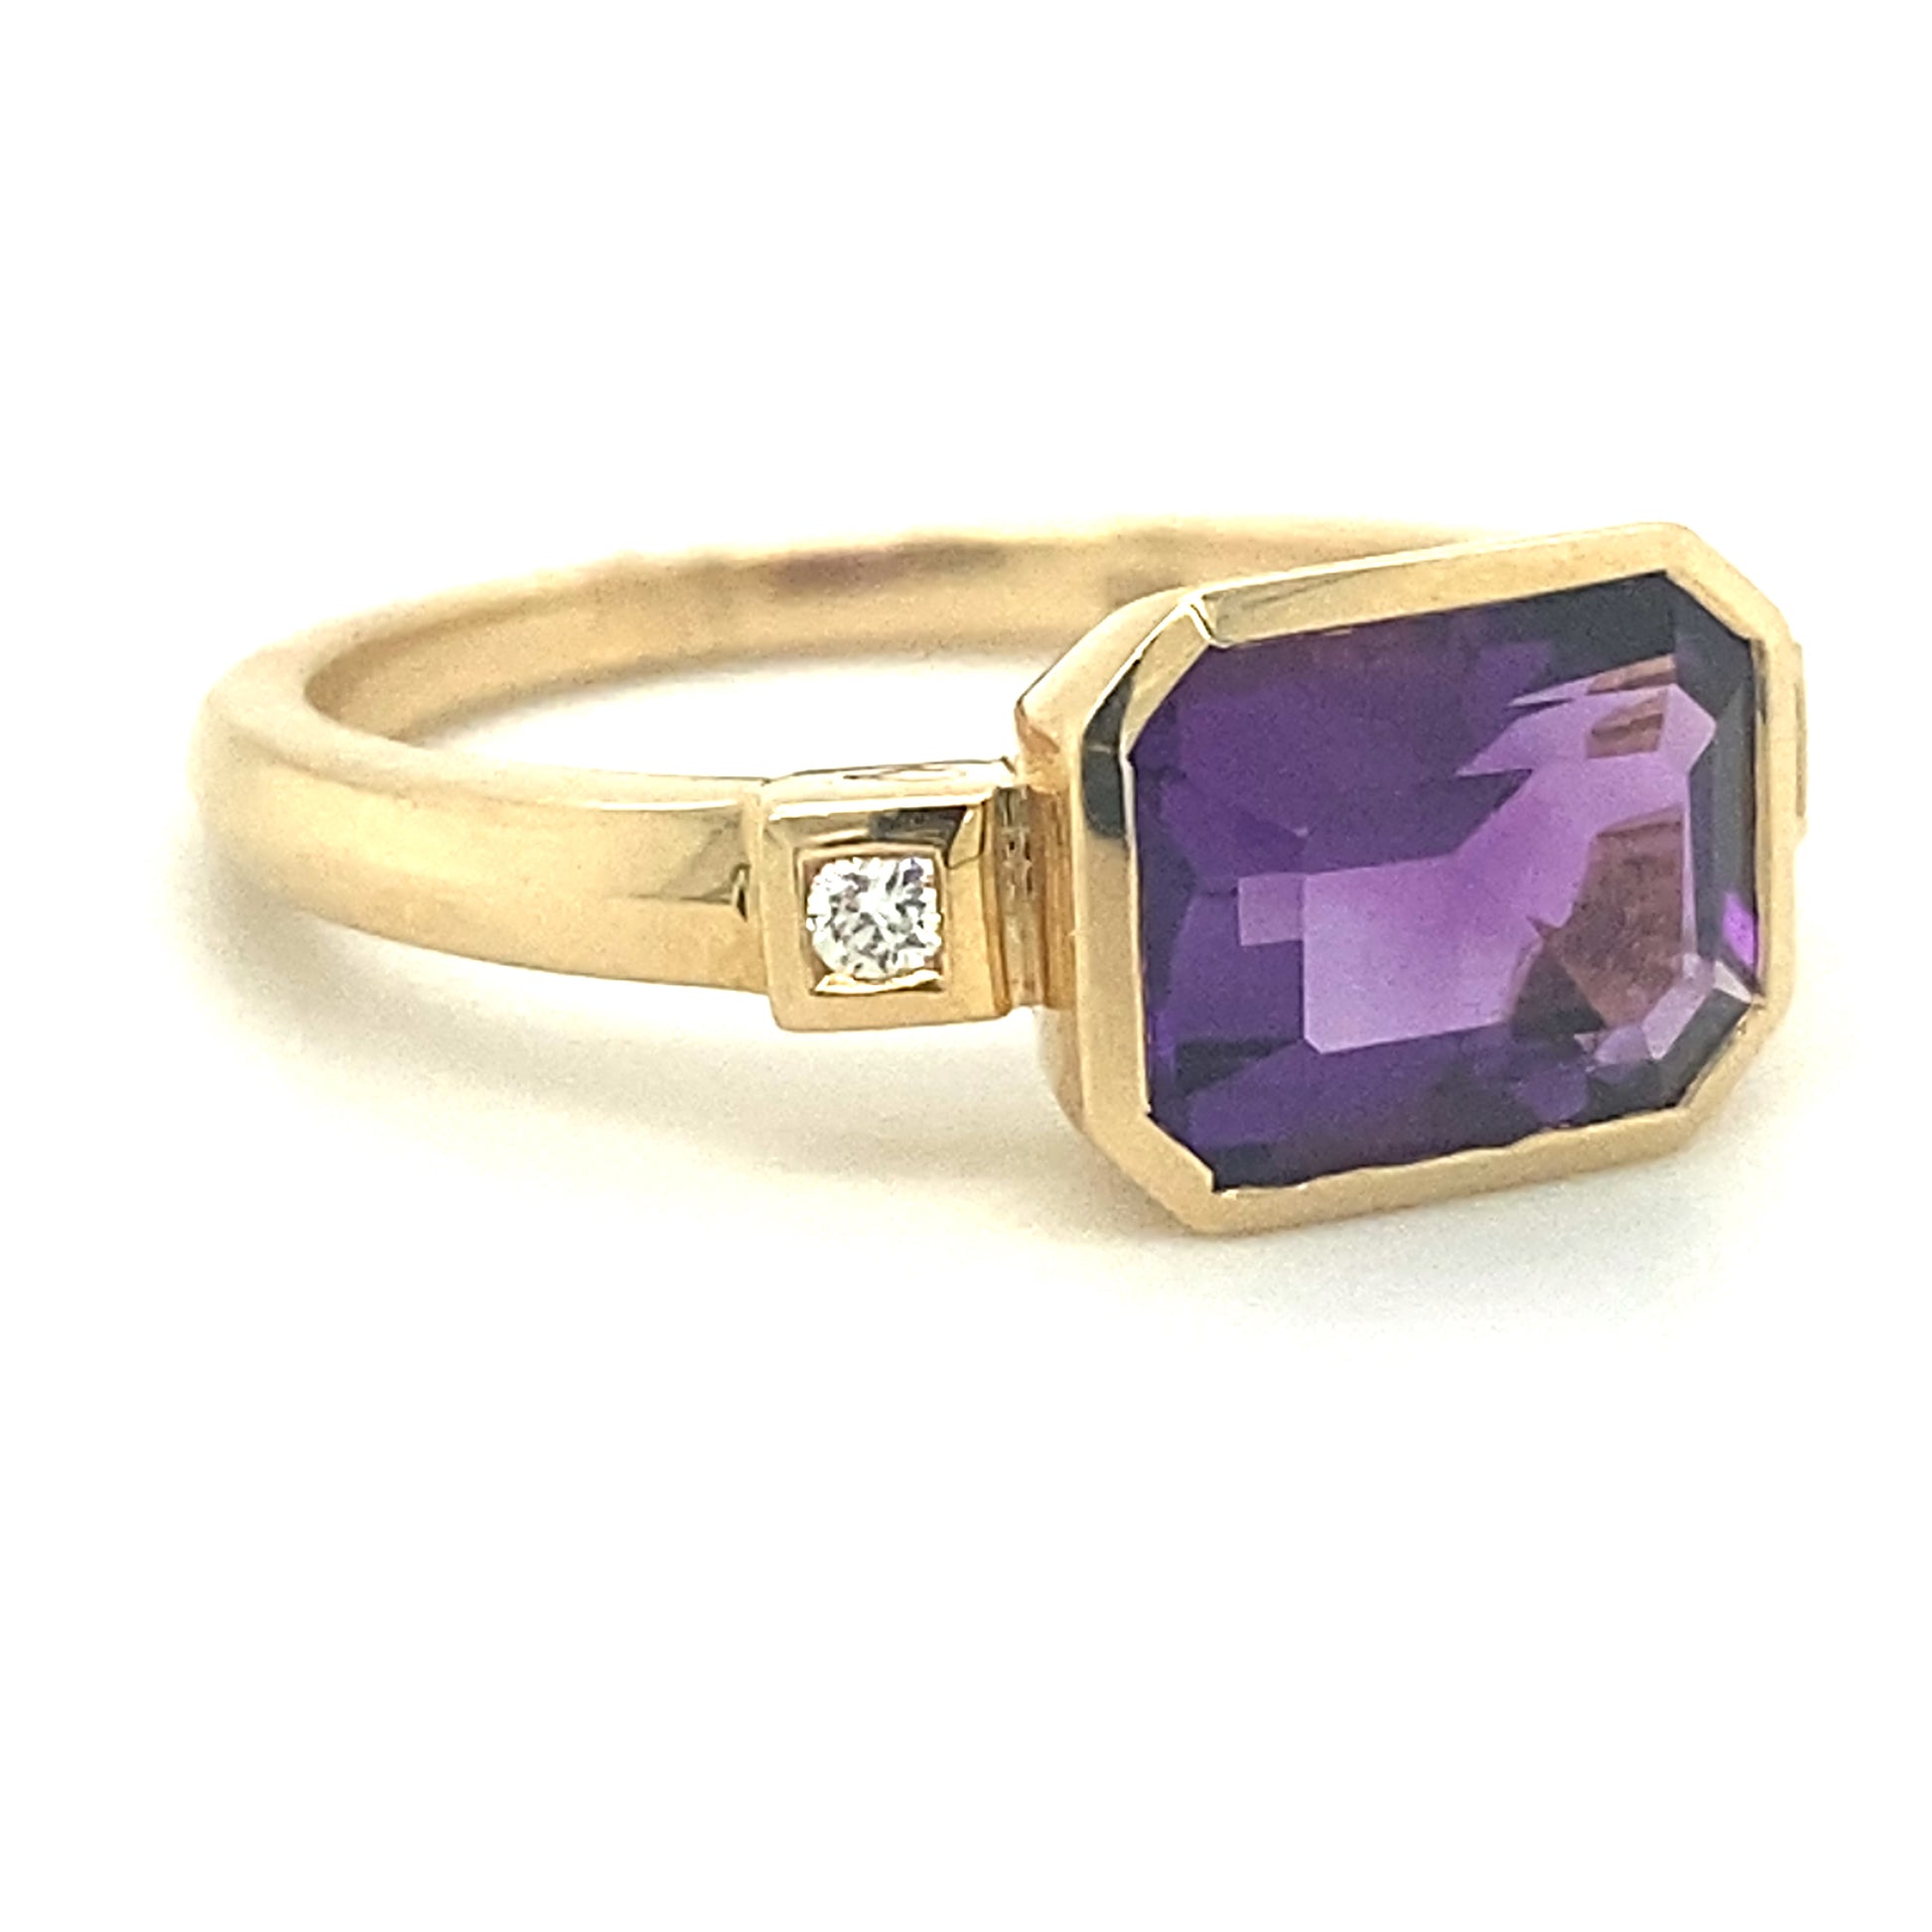 Yellow Gold Amethyst Ring - Colored Stone Rings - Women's